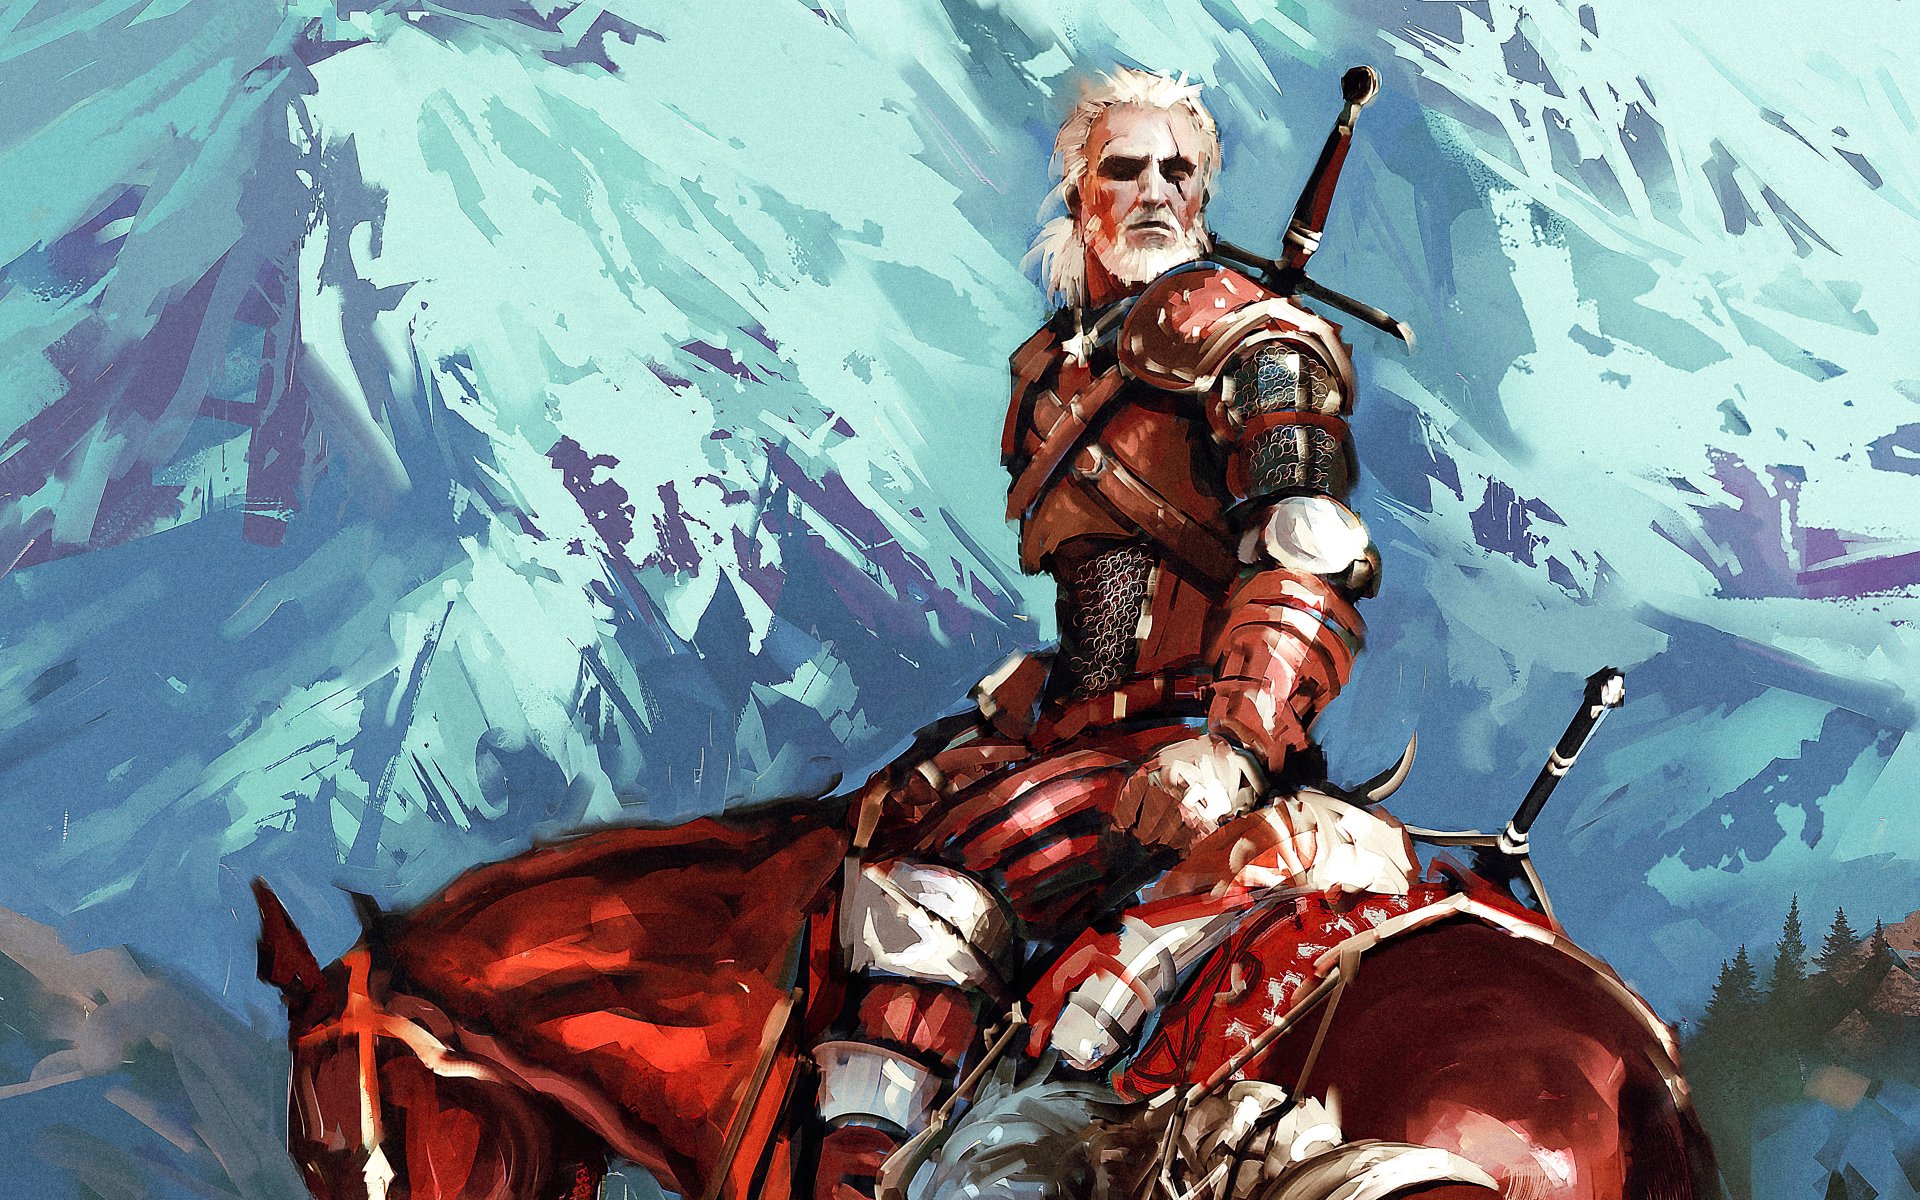 General 1920x1200 video games fan art PC gaming The Witcher 3: Wild Hunt video game men video game characters fantasy men video game art Geralt of Rivia